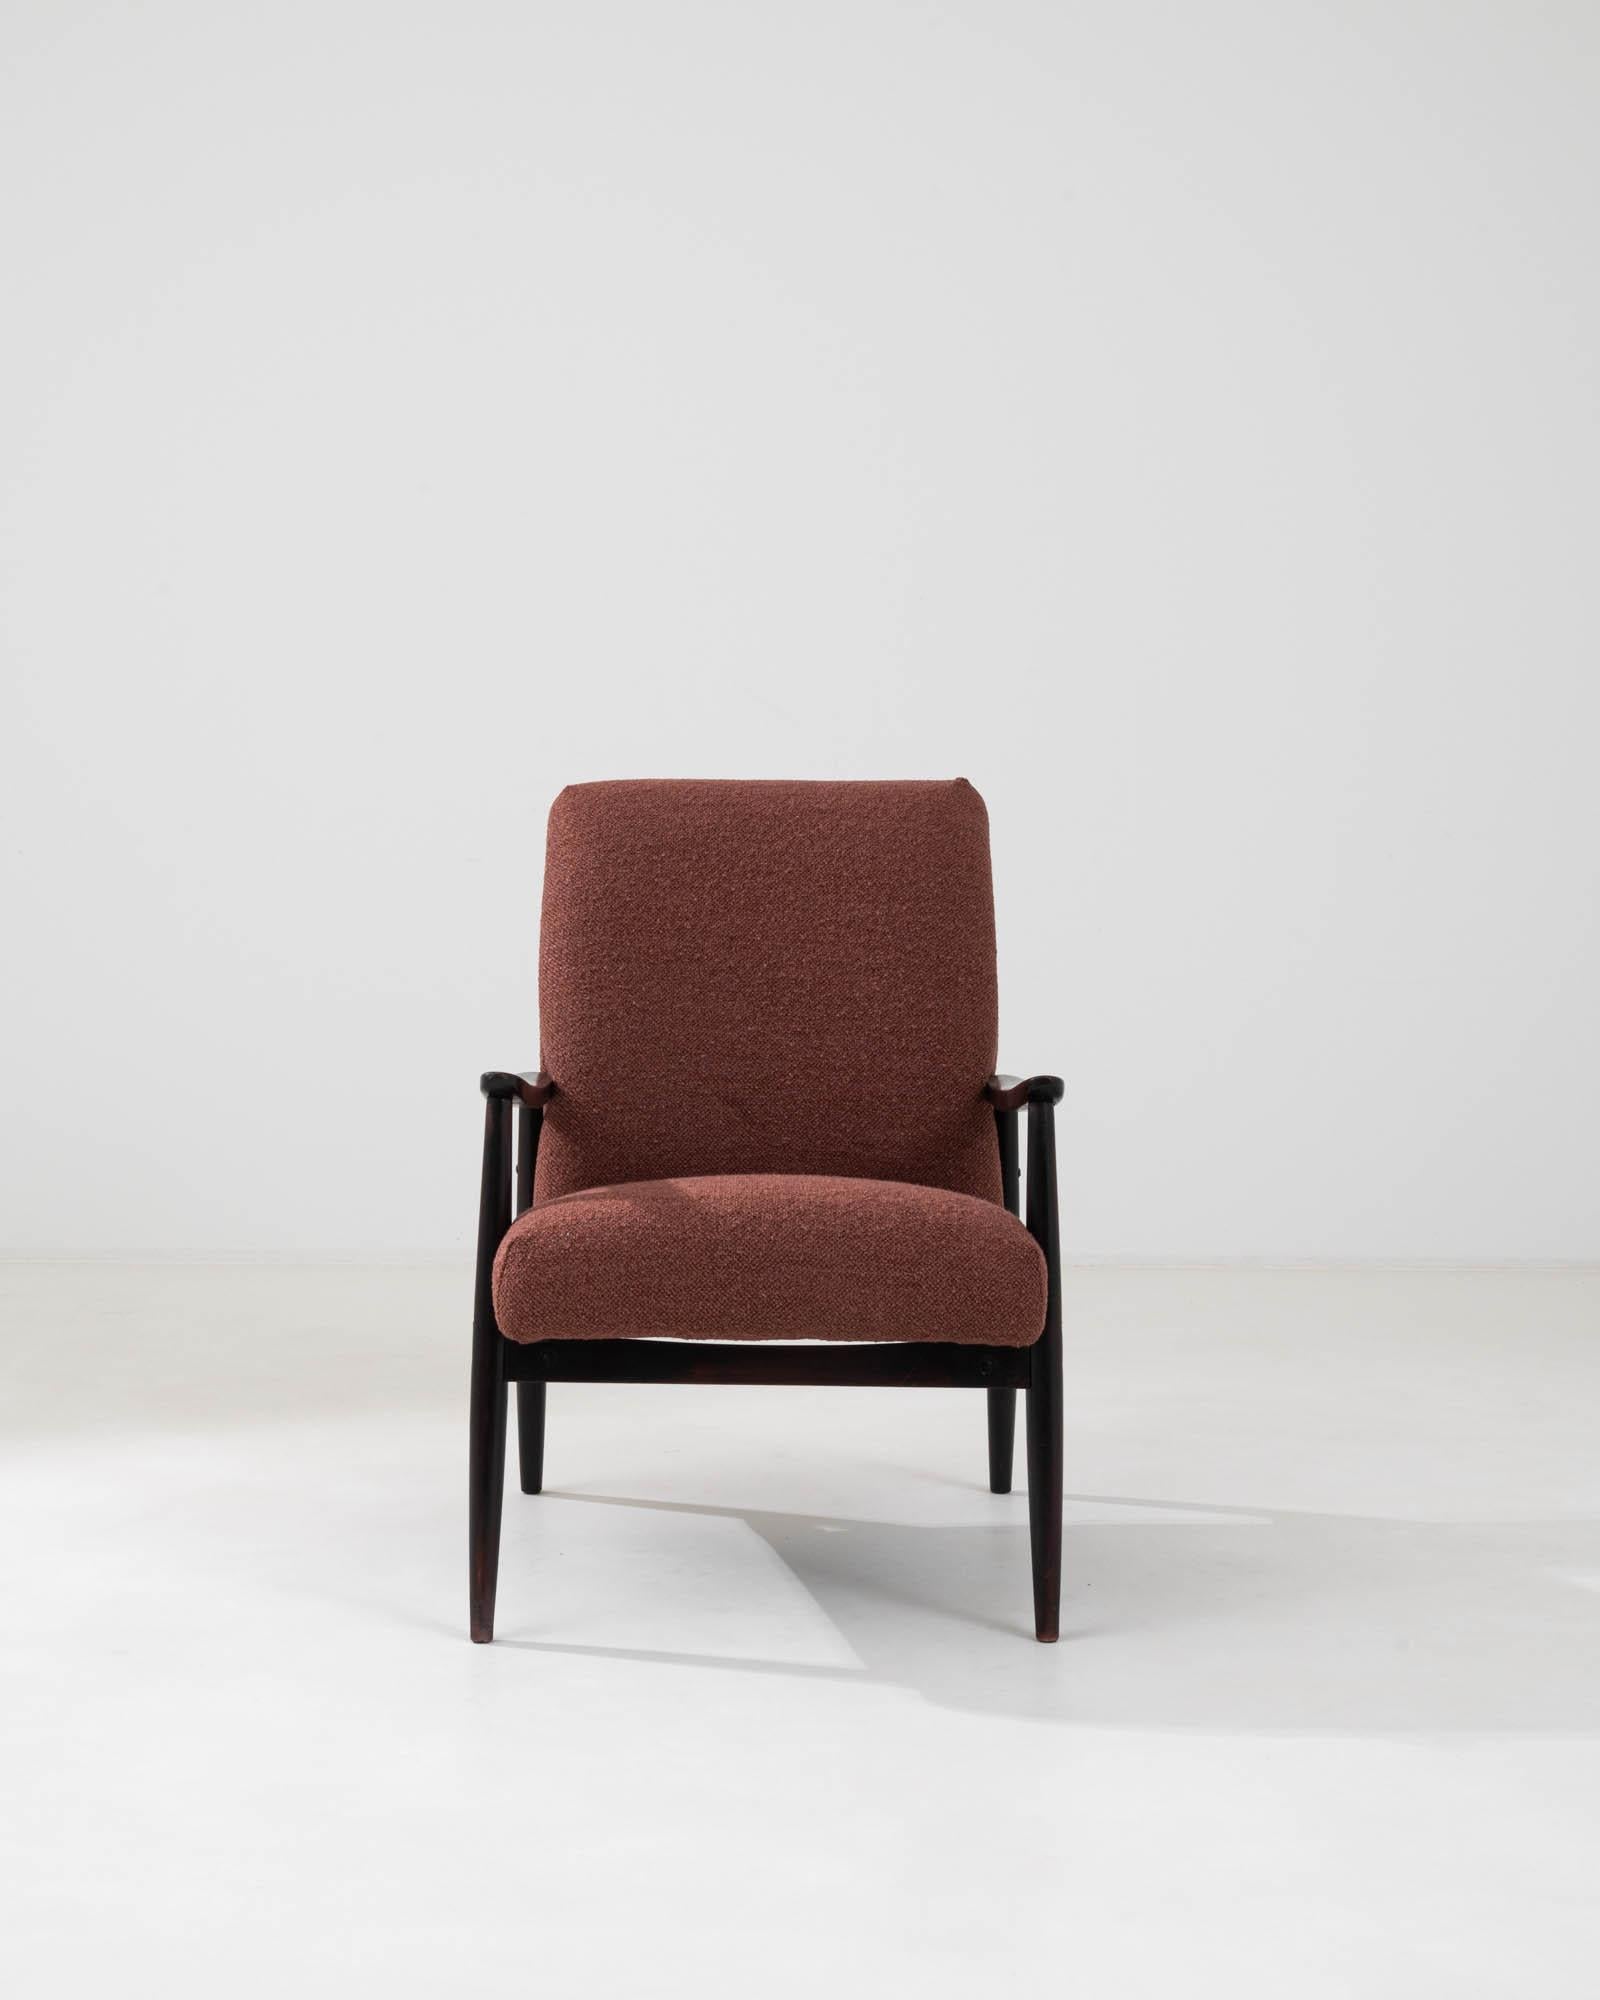 Step into the retro elegance of the 1960s with this Czech upholstered armchair. Dressed in a rich, textured rust fabric, it's a nod to the era's penchant for bold, confident colors and comfort. The armchair's design is grounded by a robust, dark